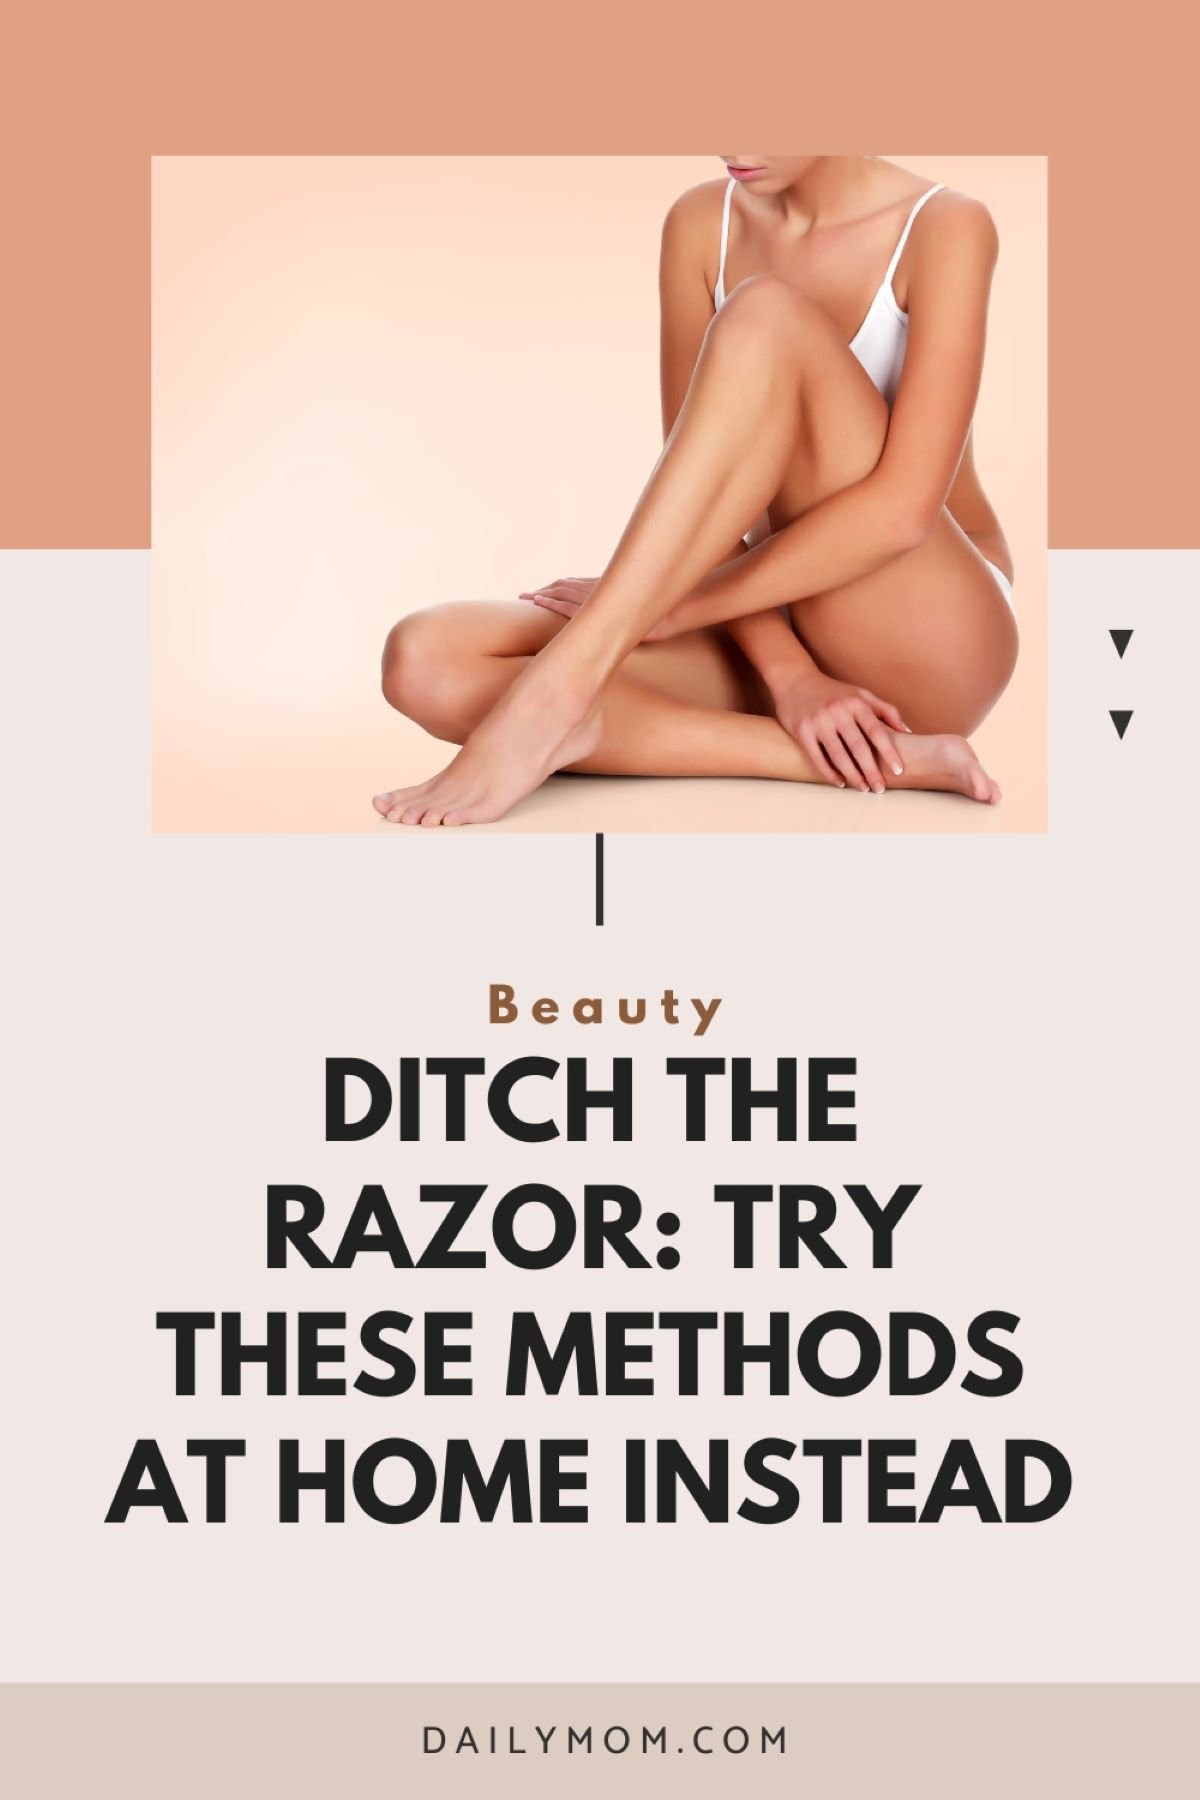 Ditch The Daily Razor Grind: 3 Best And Natural Hair Removal Methods You Can Try At Home That Actually Work 6 Daily Mom, Magazine For Families